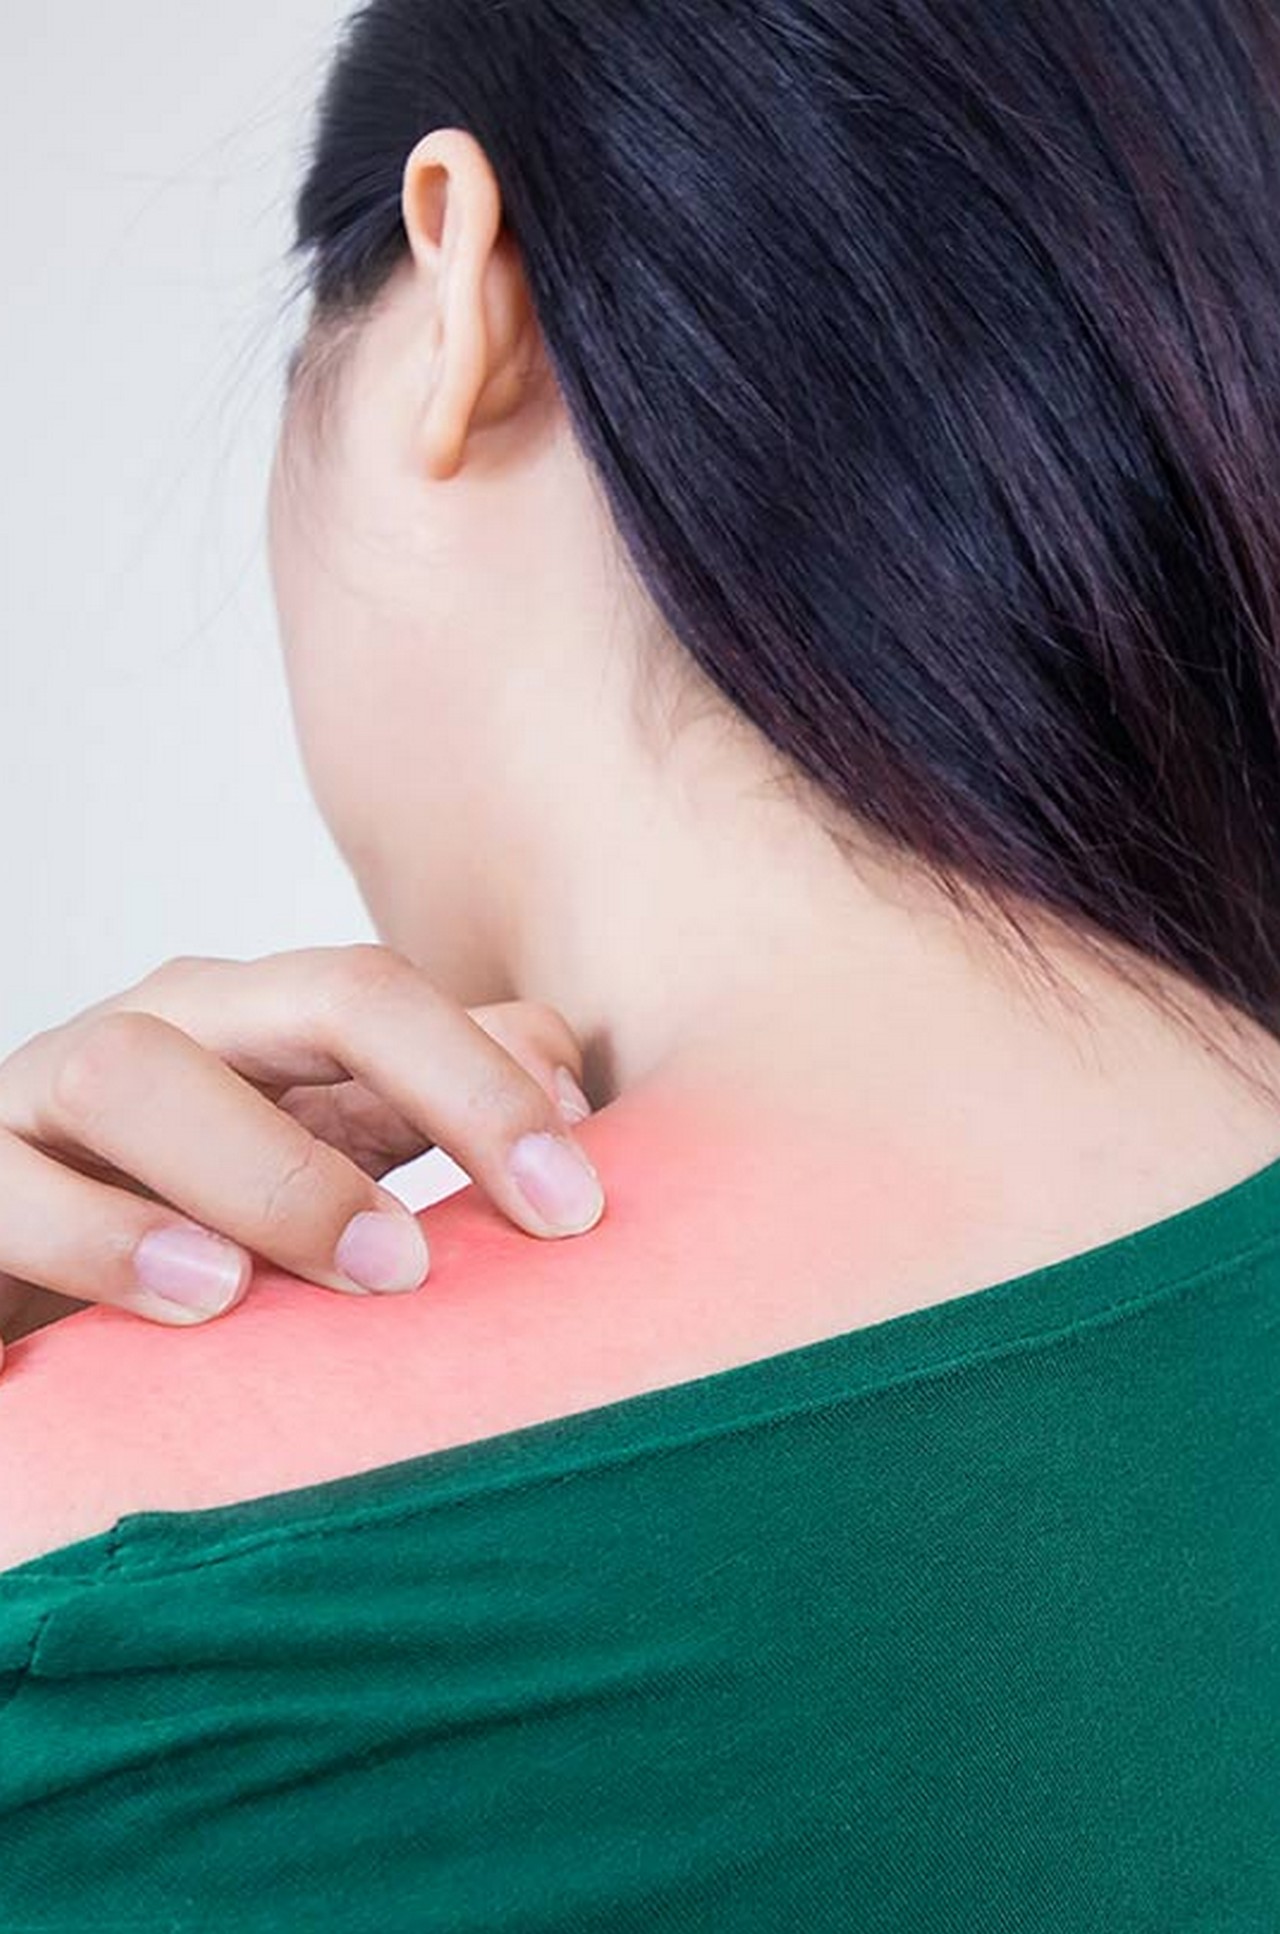  27 Home Remedies For Prickly Heat That Provide Quick Relief